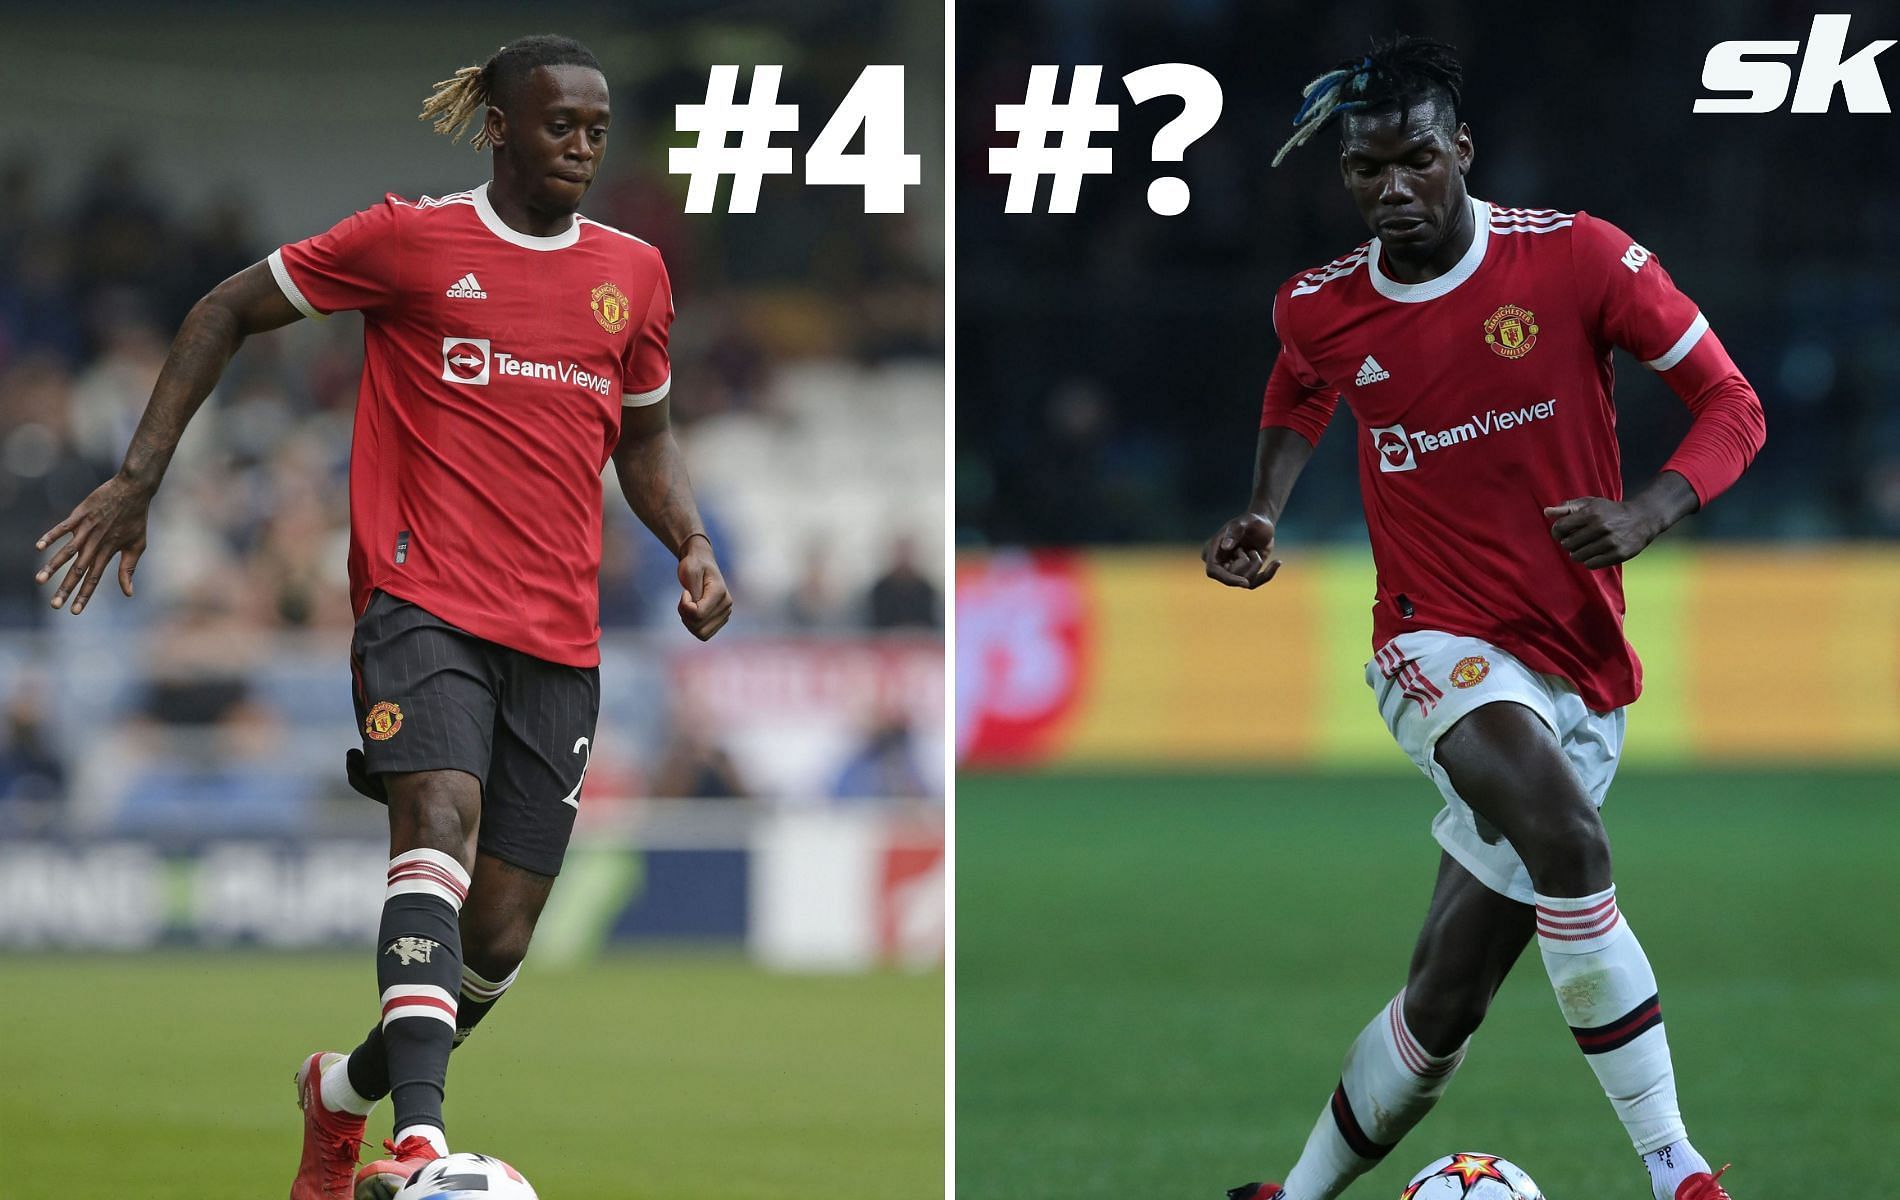 Who is the best dribbler at Manchester United right now?